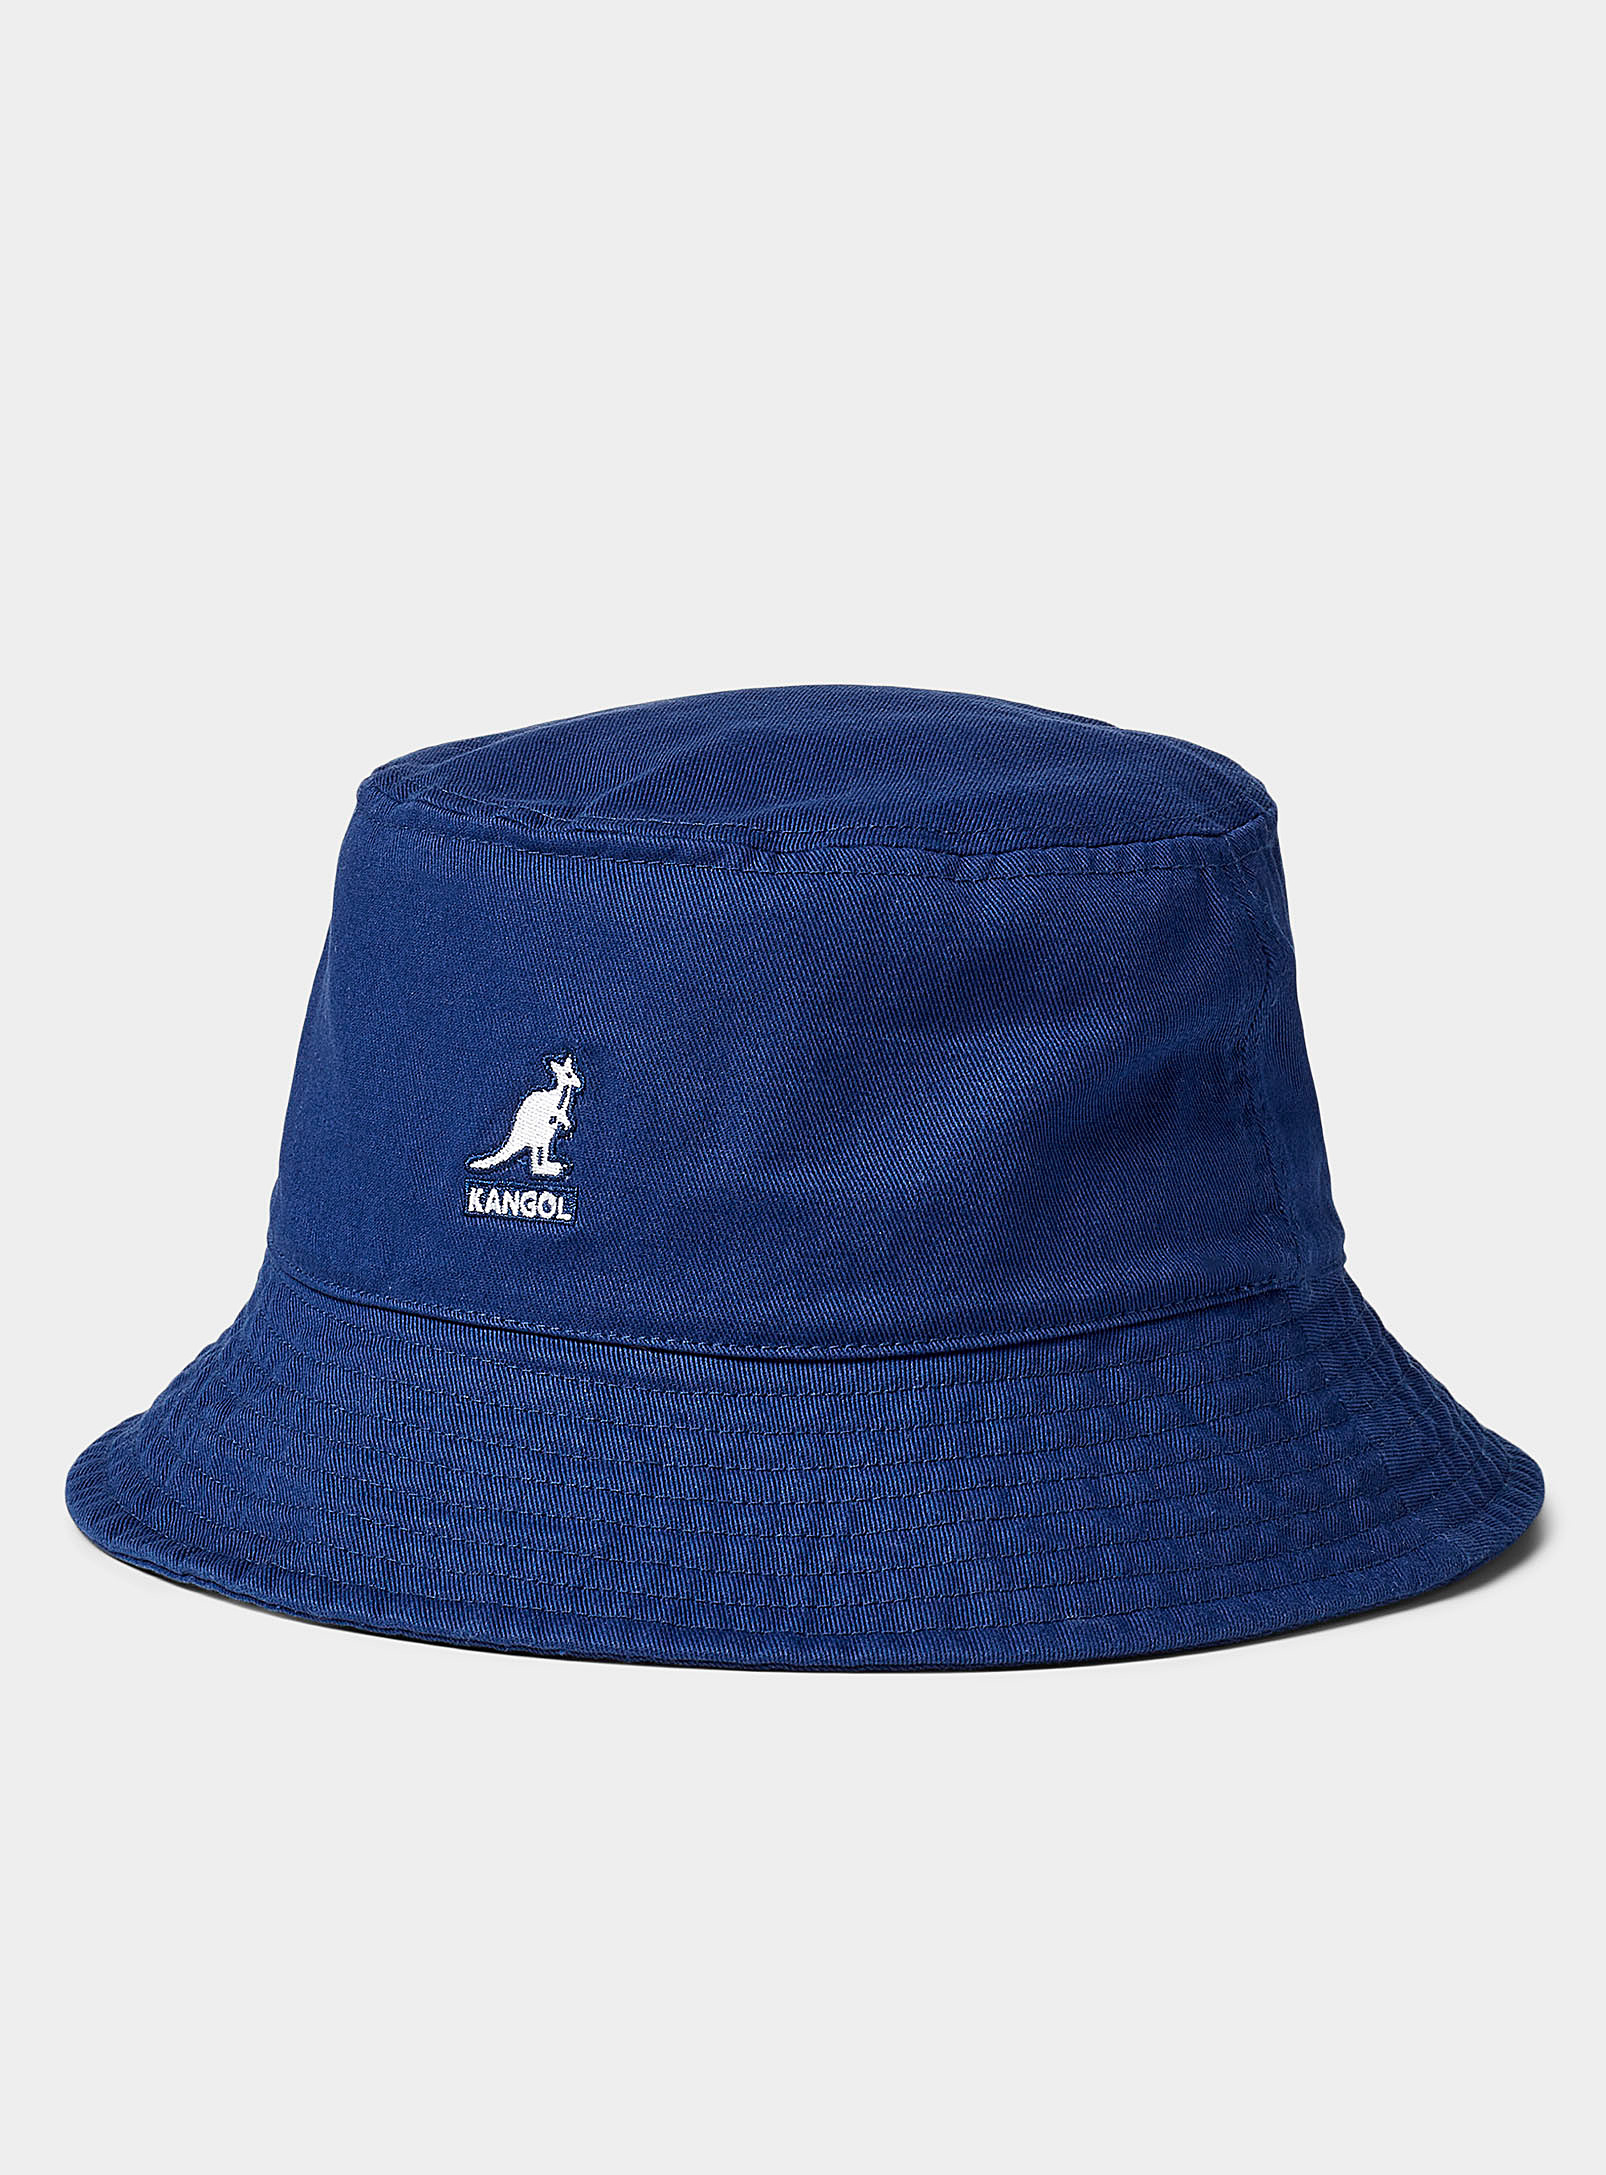 Kangol Embroidered-logo Colourful Bucket Hat In Sb402starry Blue